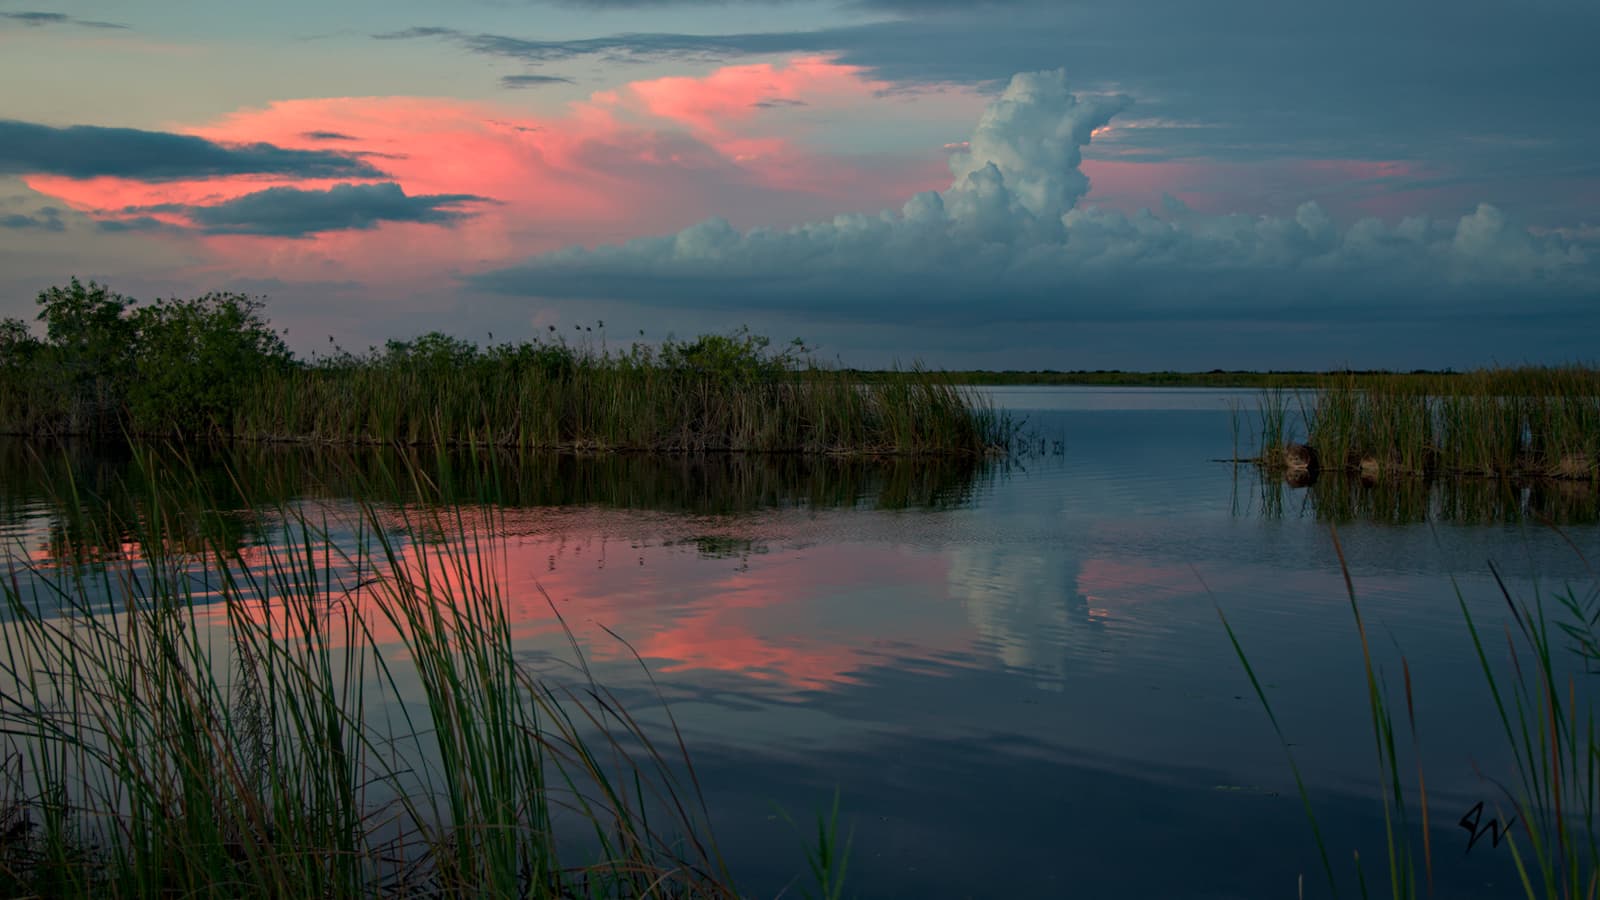 Cloud looks like a submarine in the pink swamp sky and reflects in the calm water near dusk.